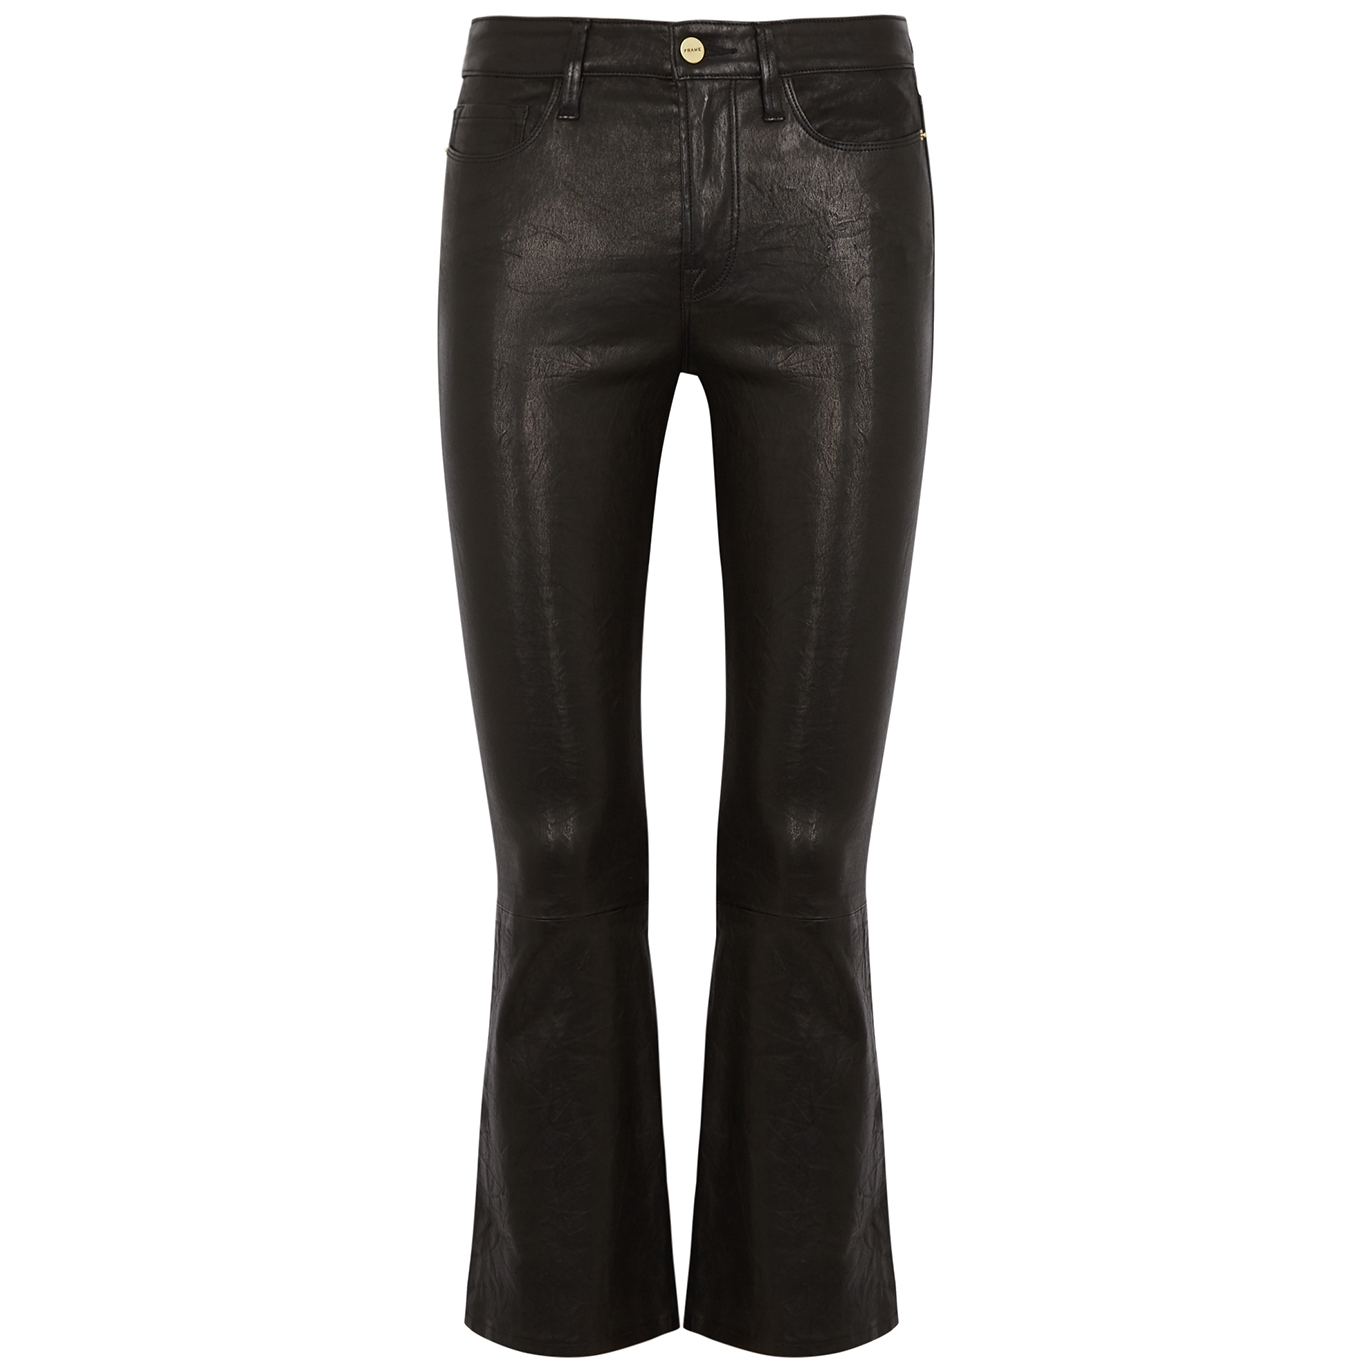 Frame Le Crop Mini Boot Black Leather Jeans - W27